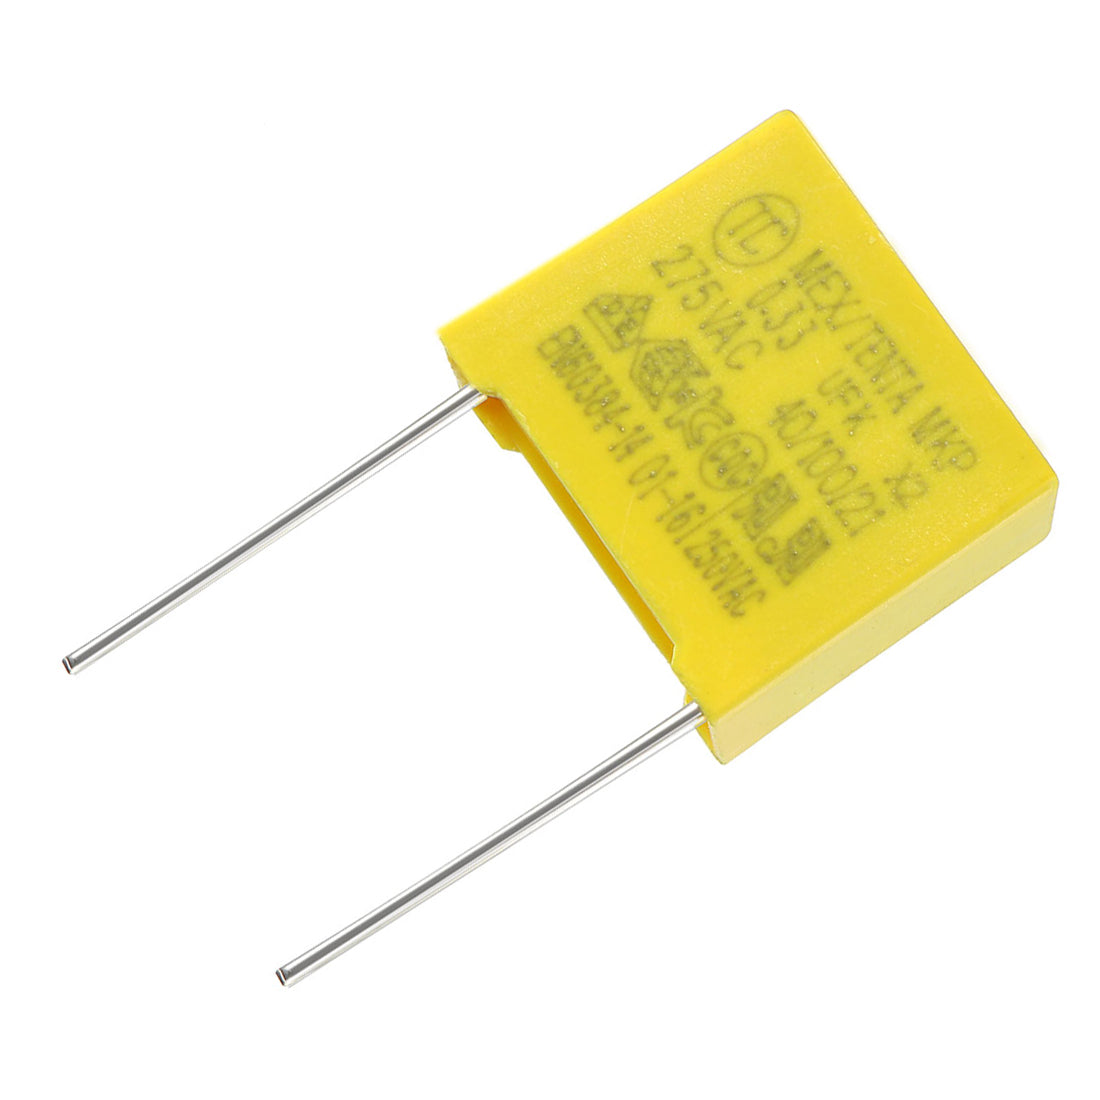 uxcell Uxcell Safety Capacitors Polypropylene Film 0.33uF 275VAC X2 MKP 5 Pcs